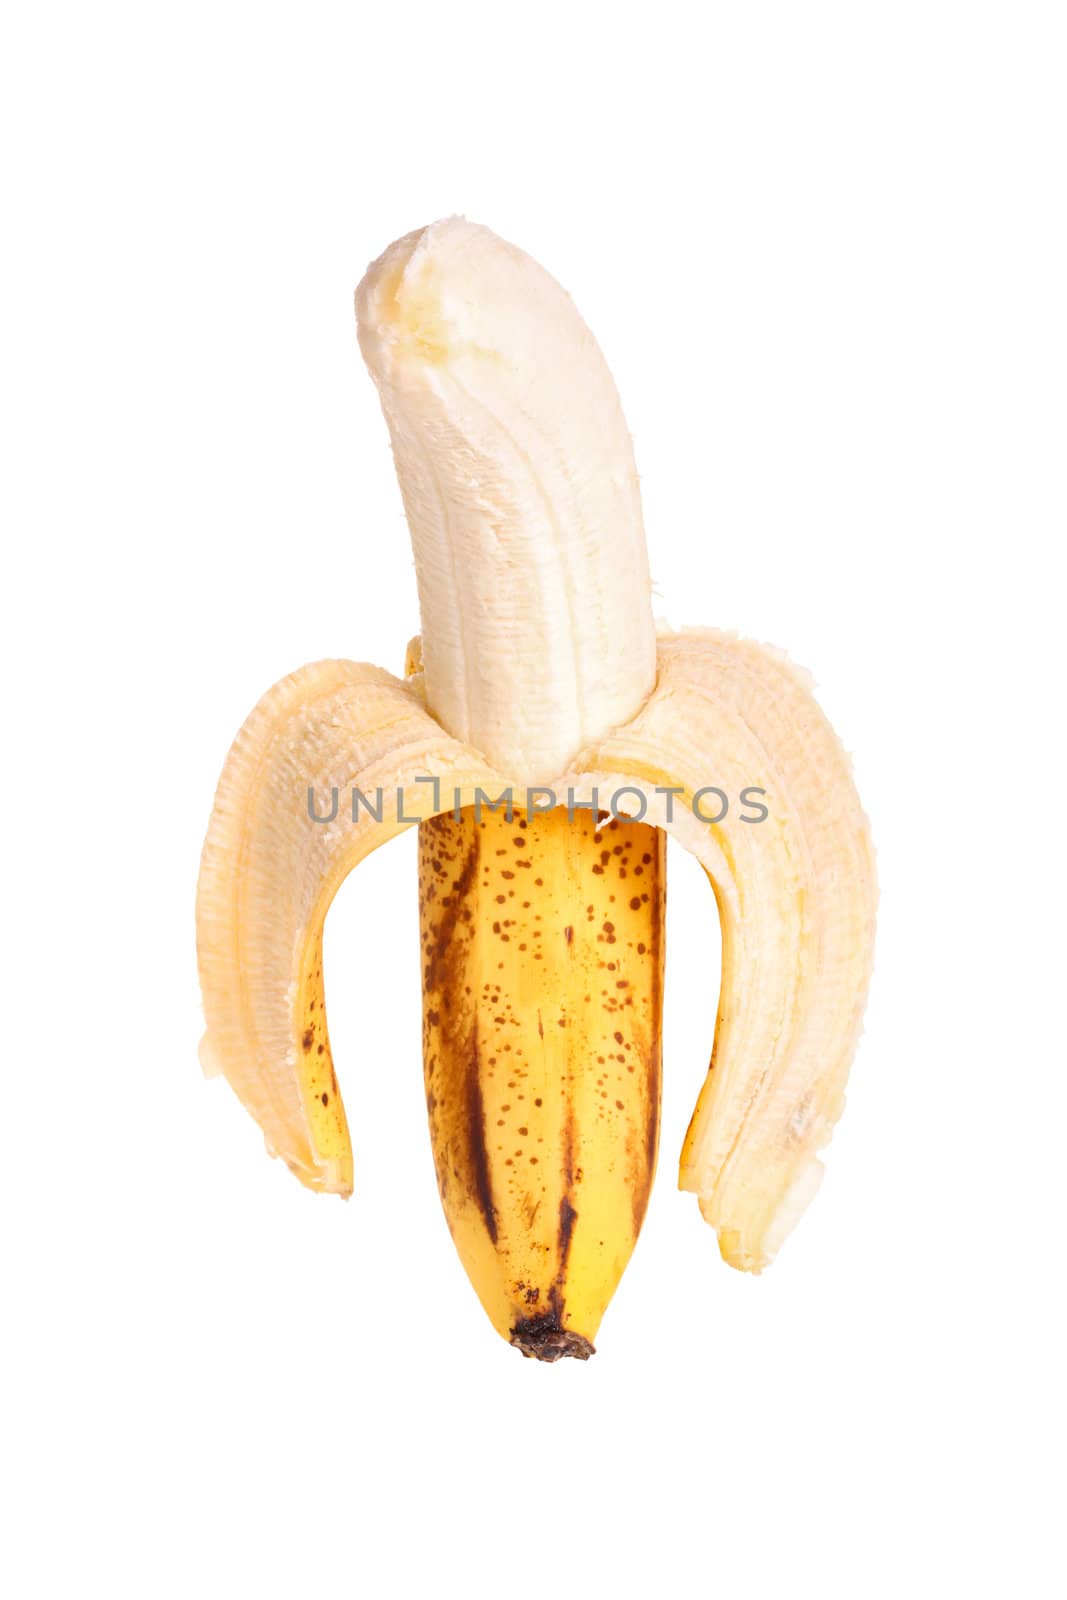 Perfectly ripe, brown-spotted banana is partially peeled against a white background